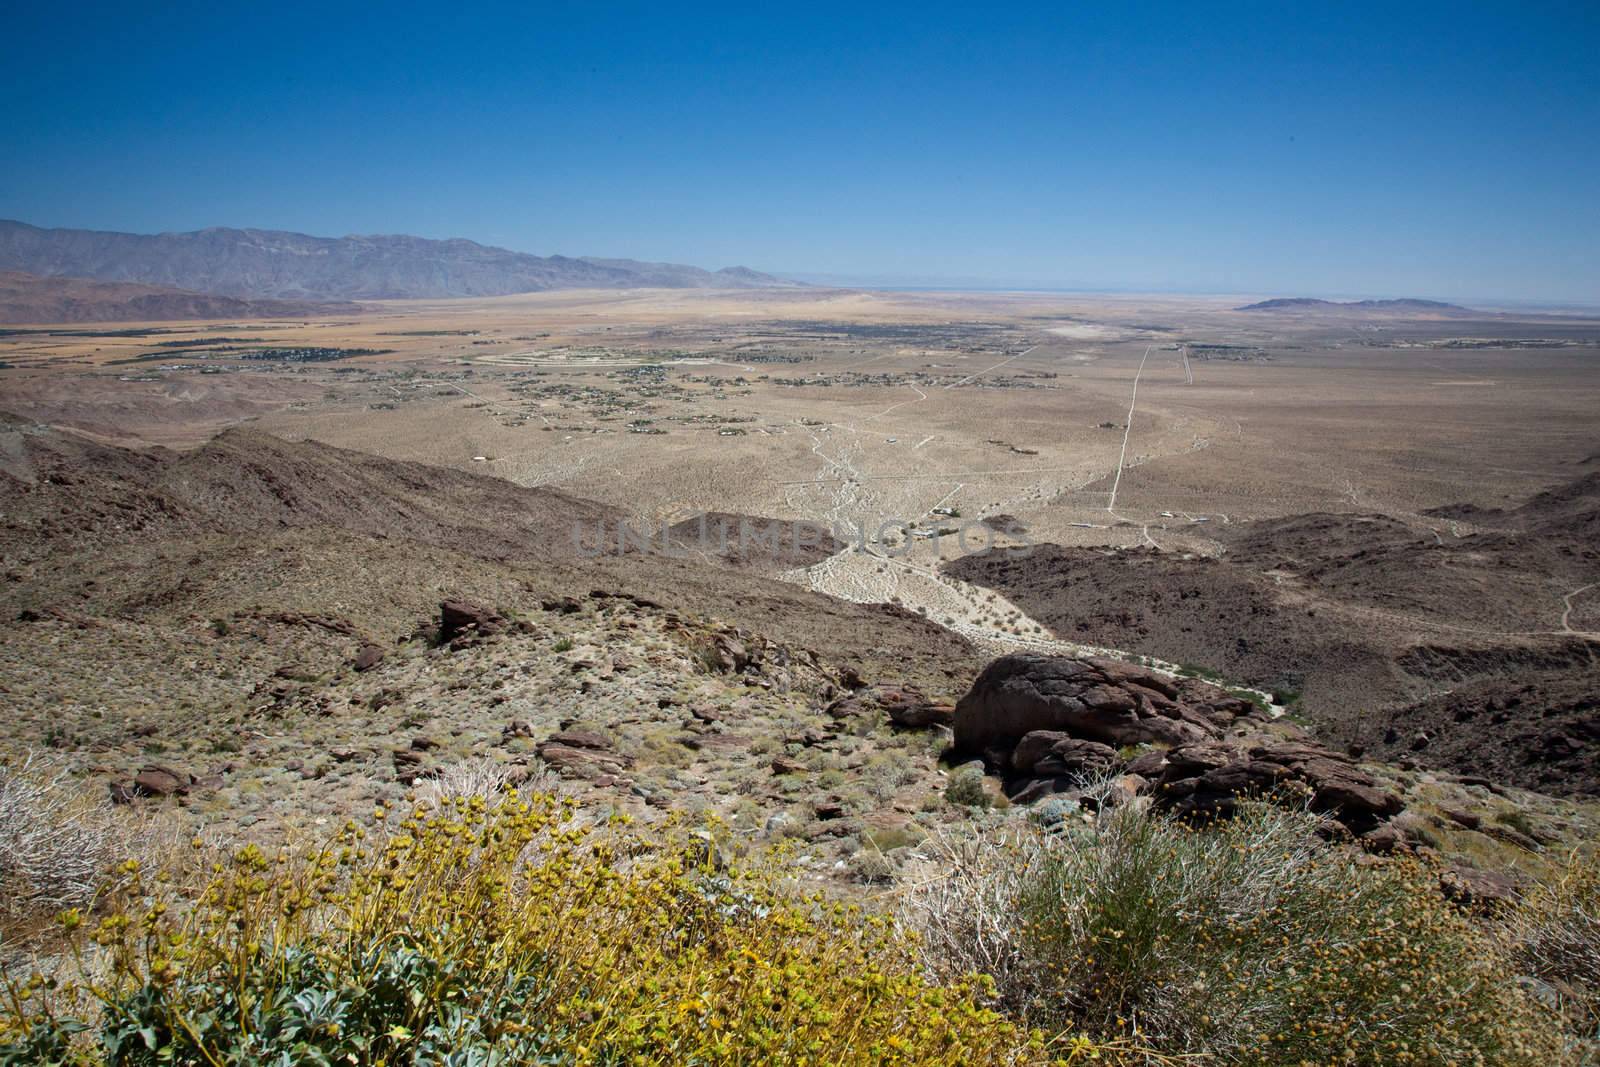 Anza Borrego desert and state park with the city of Borrego Springs in the valley framed by yellow bush